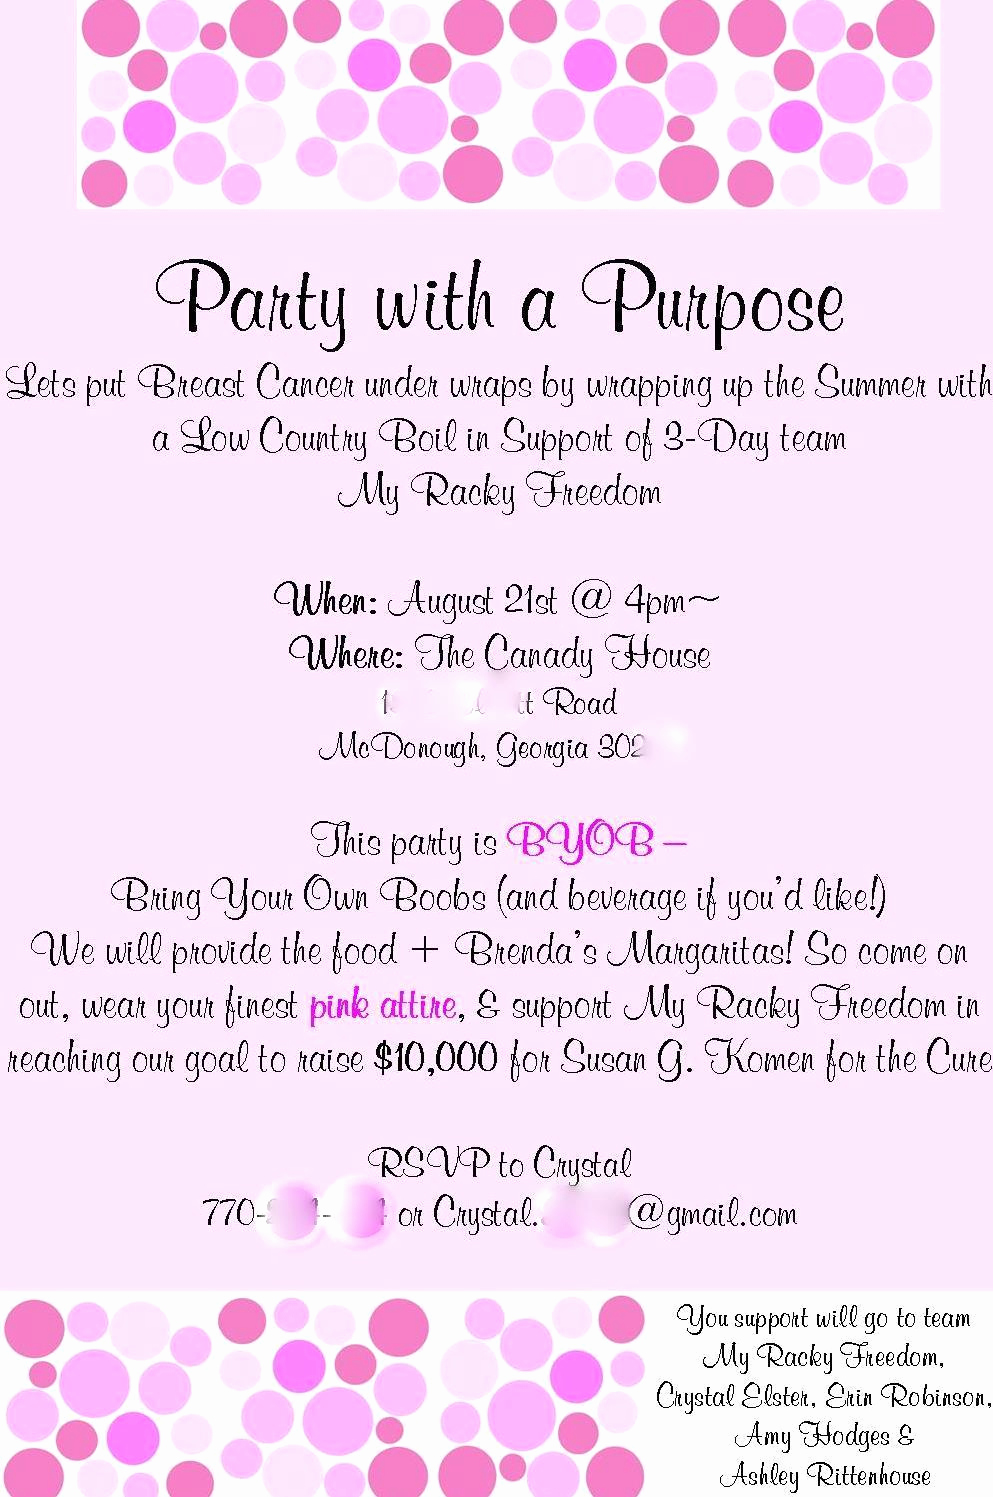 Pampered Chef Party Invitation Inspirational Pampered Chef Invitation Templates